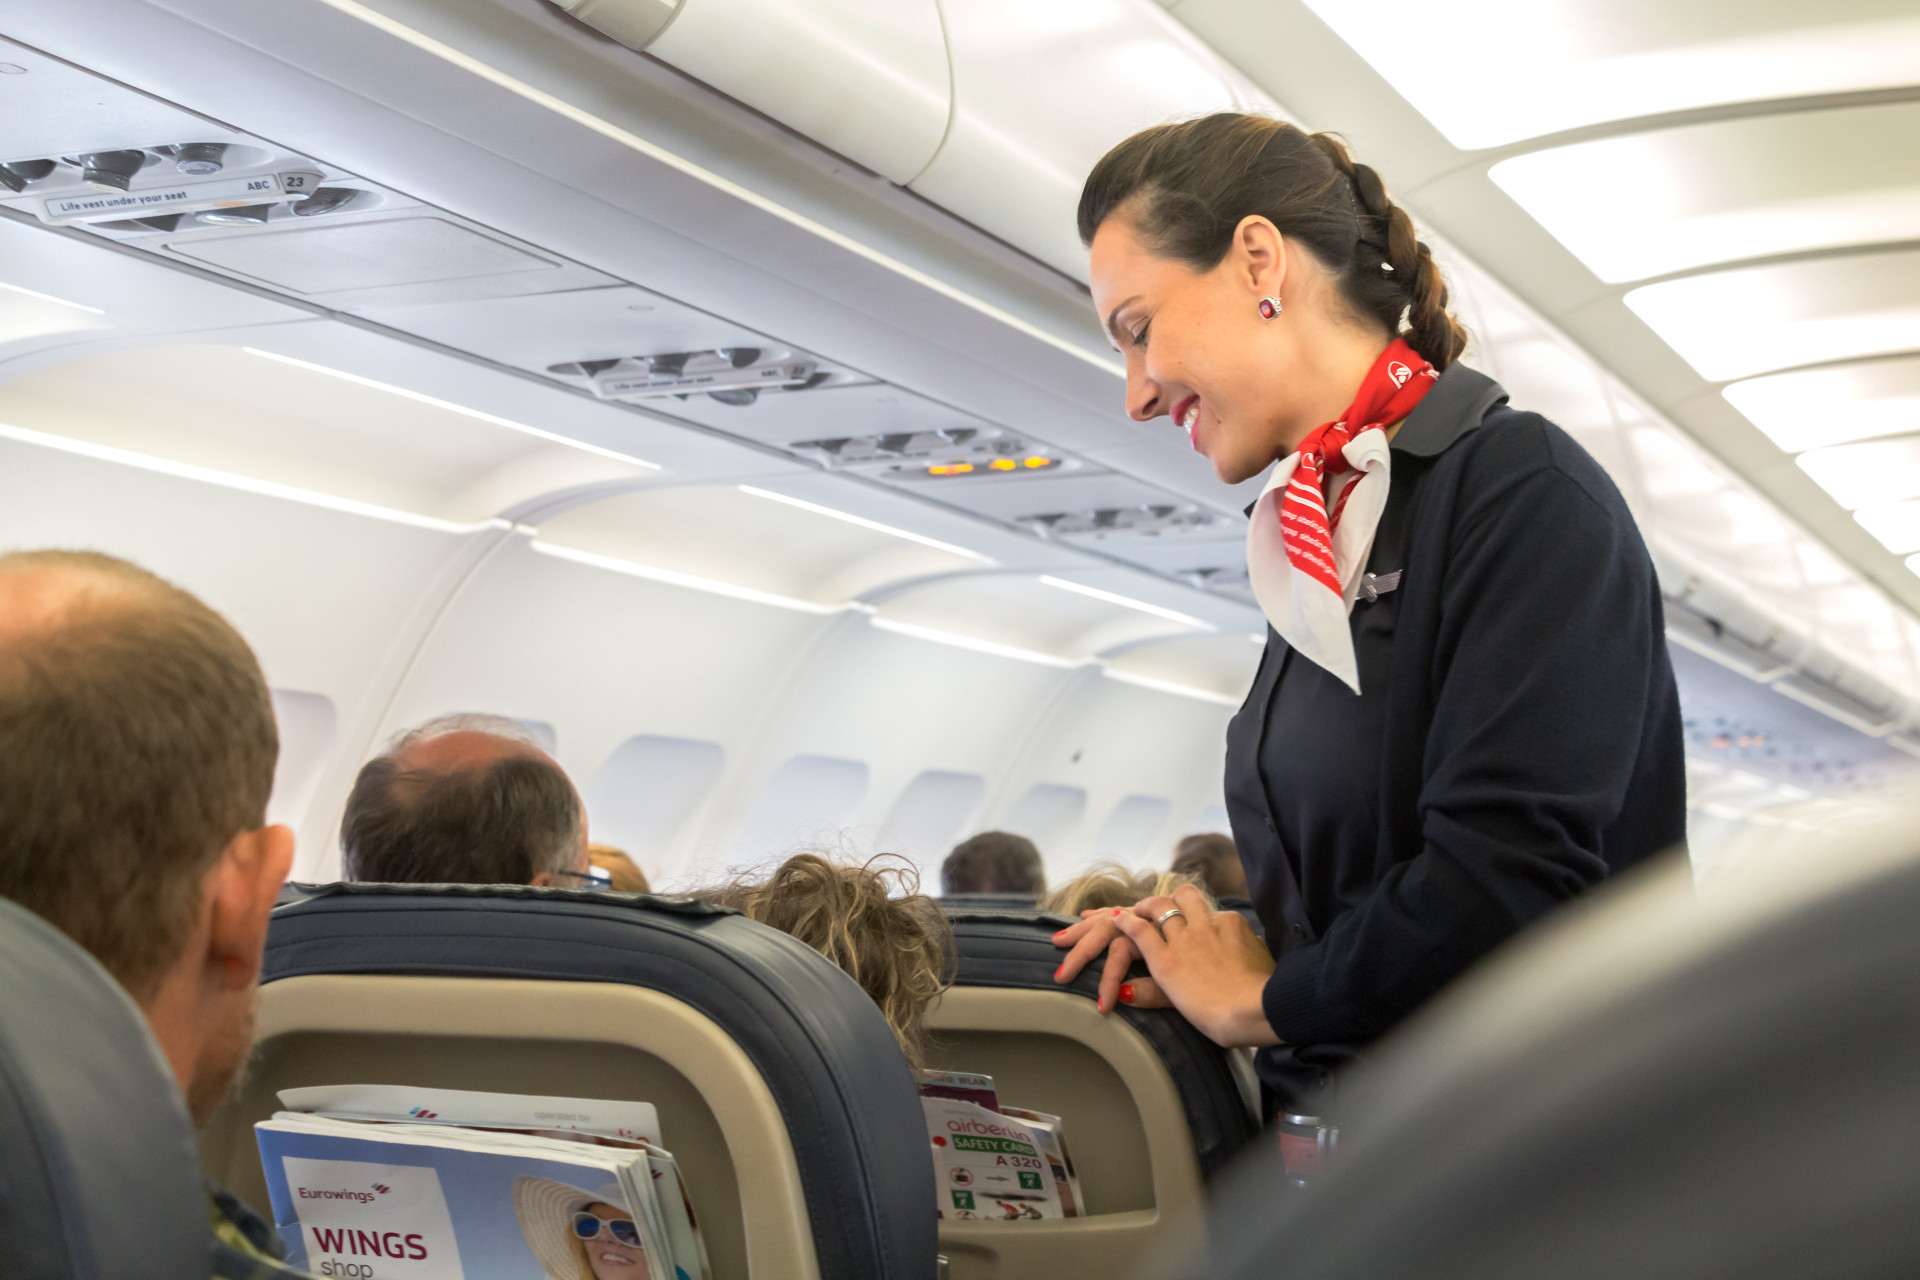 Wages vary immensely depending on the airlines, as low-cost ones pay much less than mid-range or luxury ones, and also how many hours they fly. Flight attendants can earn anywhere between US$25,000 and US$80,000 a year!<p>You may also like:<a href="https://www.starsinsider.com/n/452467?utm_source=msn.com&utm_medium=display&utm_campaign=referral_description&utm_content=240533v6en-sg"> Hollywood stars and their first R-rated movies</a></p>